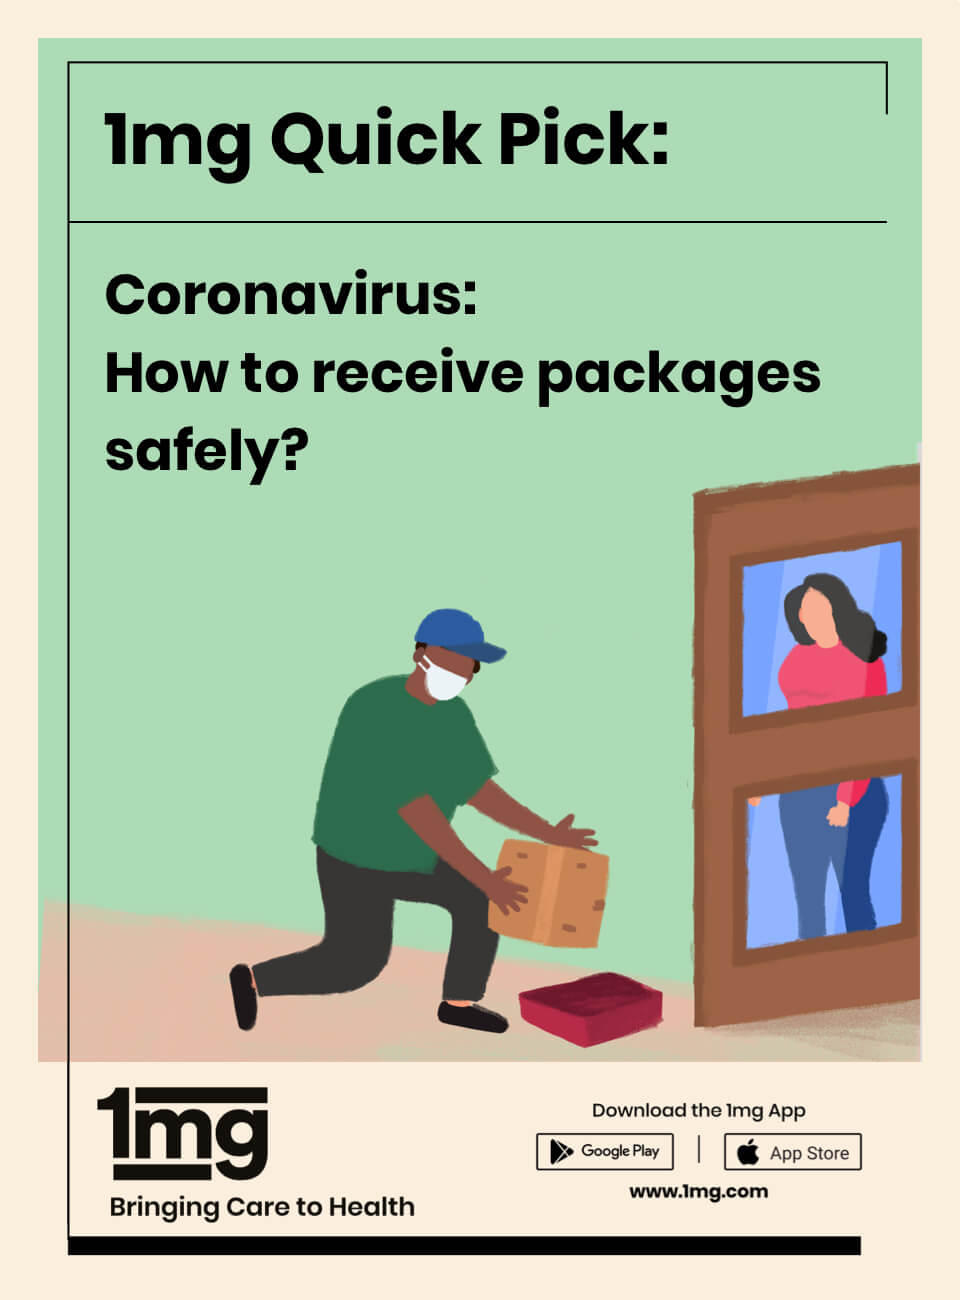 Receiving-Home-Delivery-Packages-amid_COVID-19_By-1mg